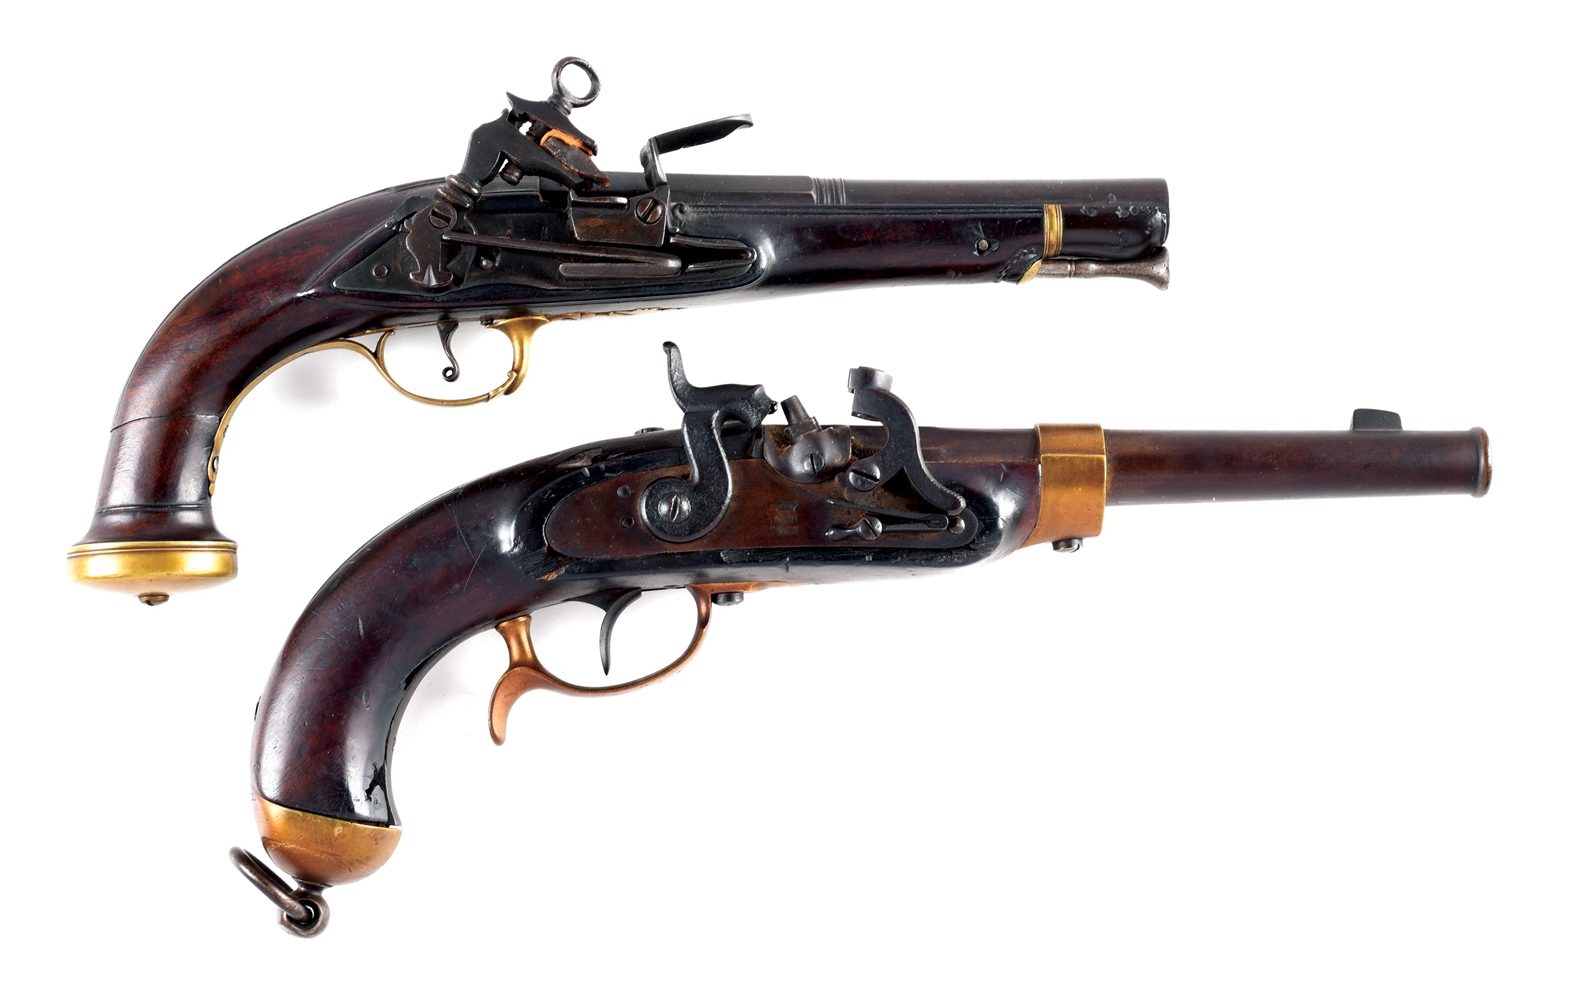 (A) LOT OF 2: SPANISH MIQUELET LOCK PISTOL AND VALENTIN SCHILLING PRODUCED PRUSSIAN 1850 CAVALRY PISTOL.